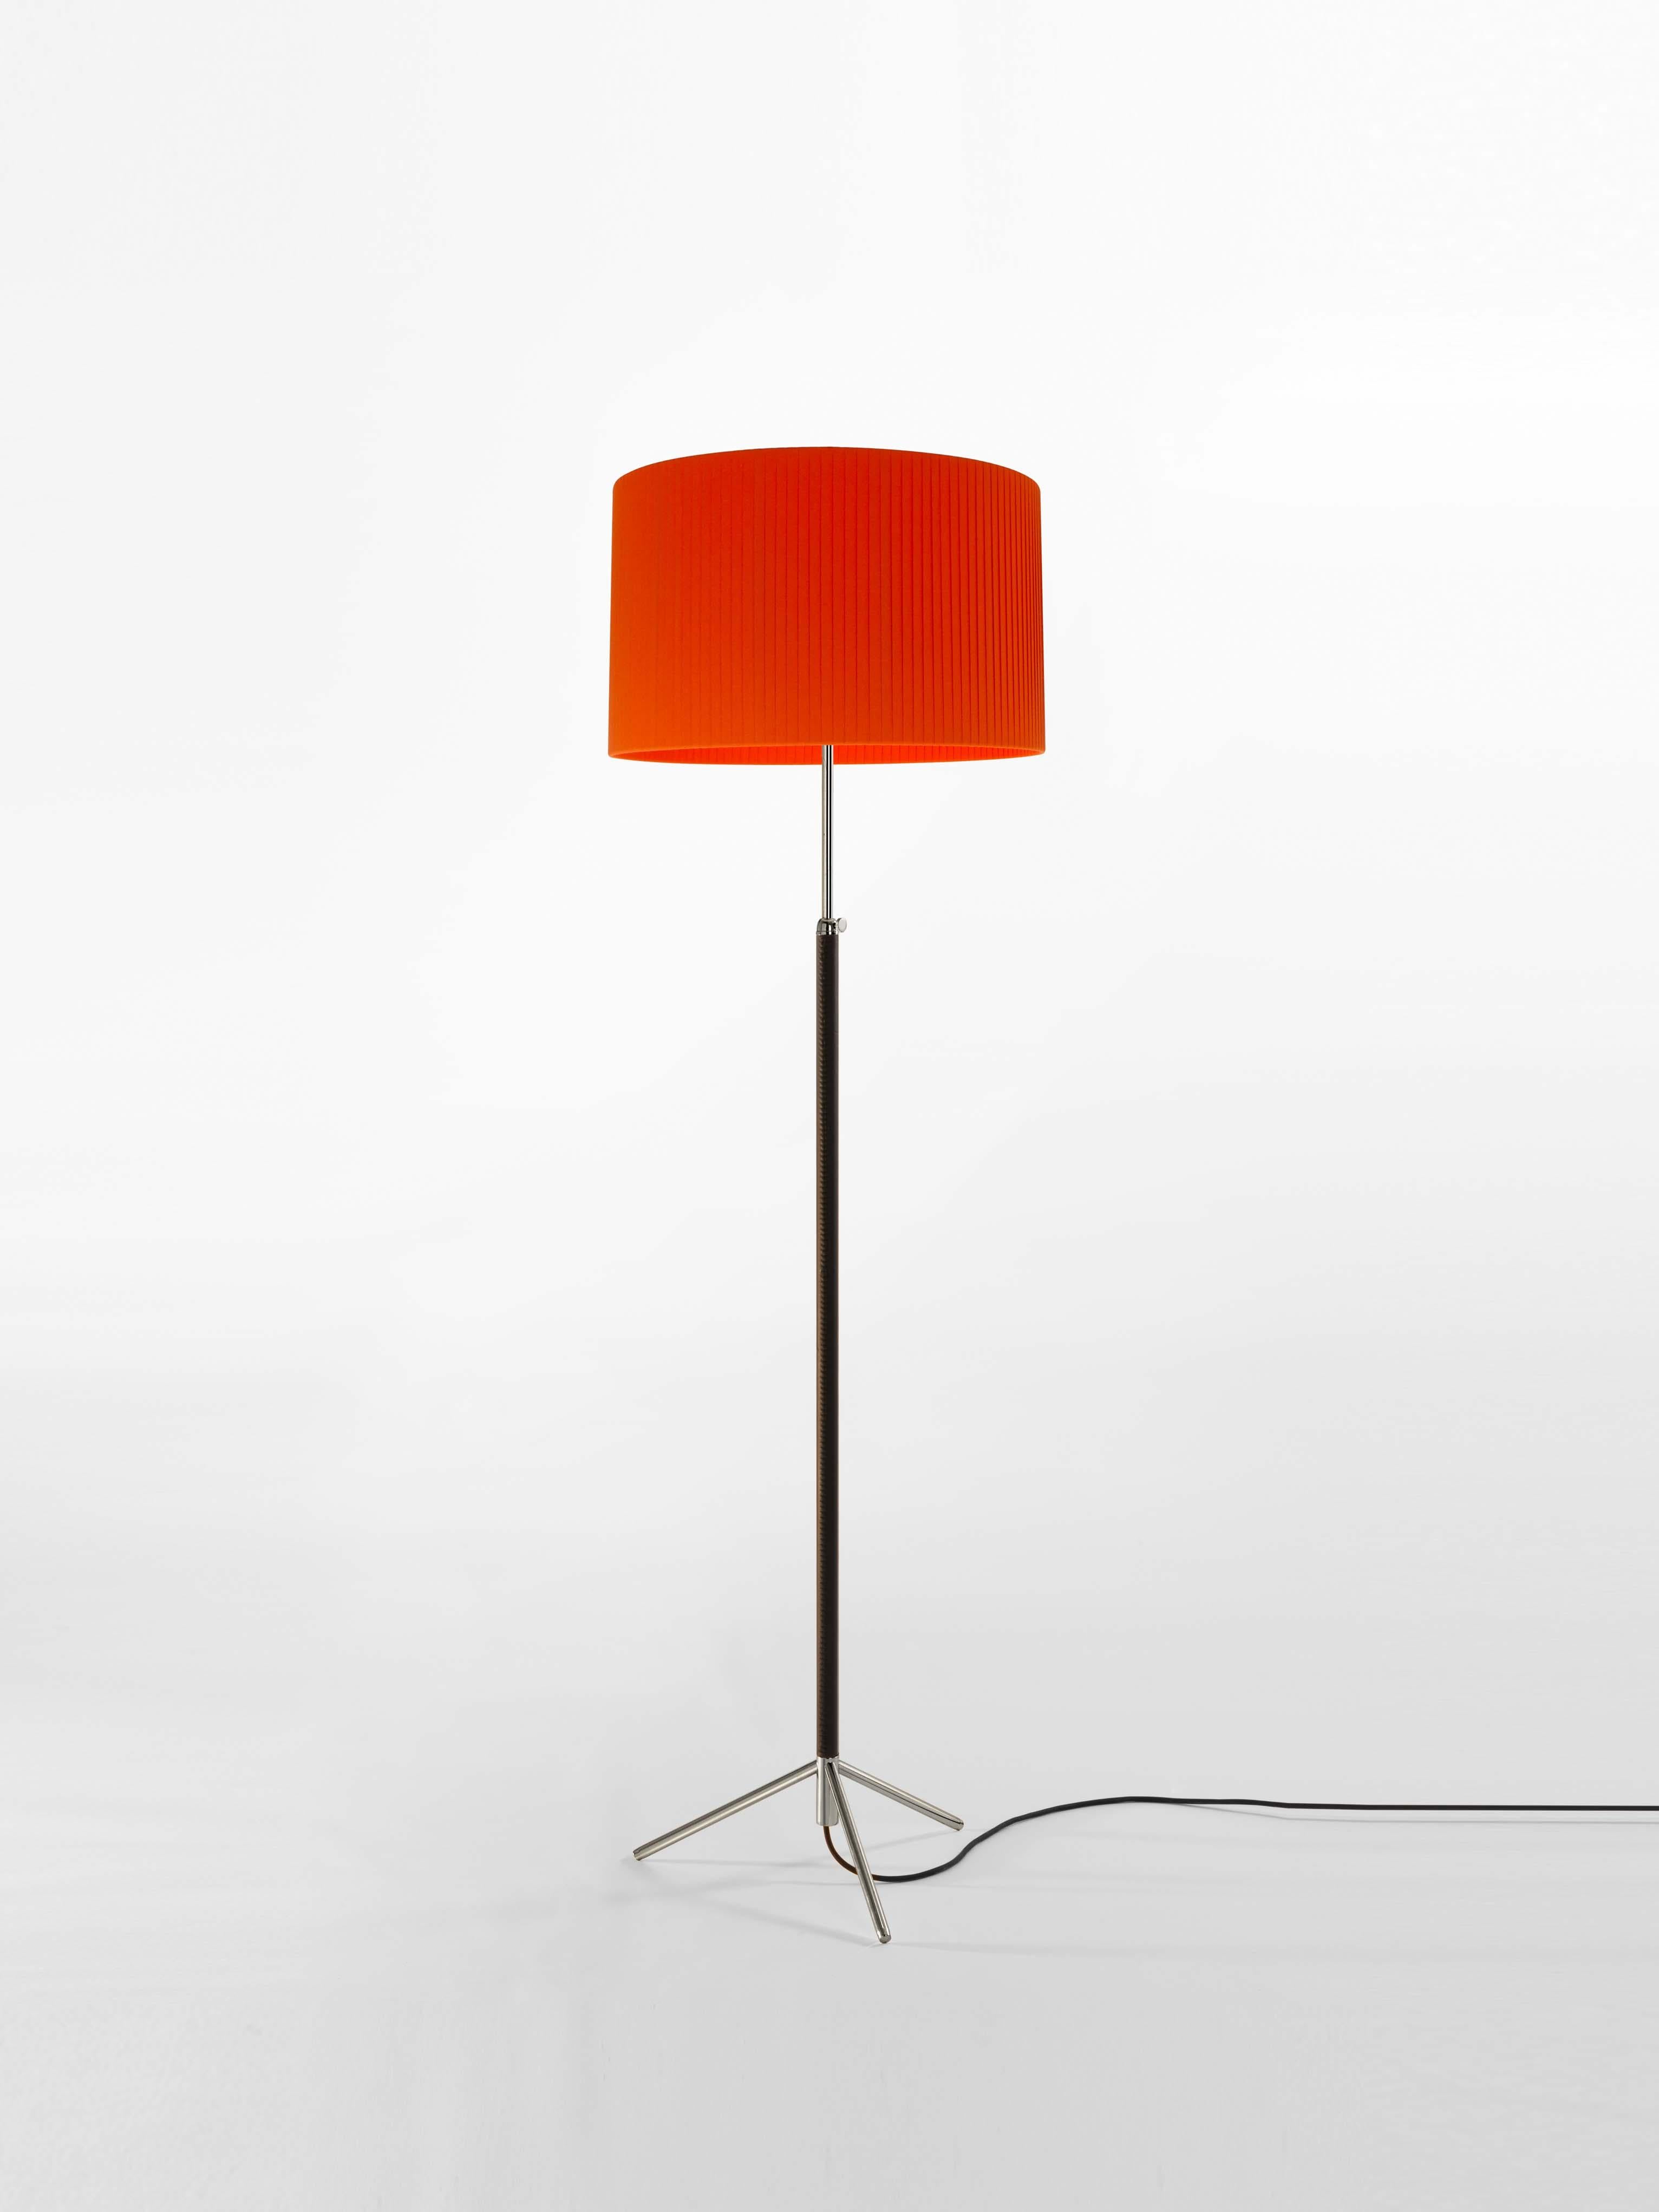 Red and chrome Pie de Salón G2 floor lamp by Jaume Sans
Dimensions: D 45 x H 120-160 cm
Materials: Metal, leather, ribbon.
Available in chrome-plated or polished brass structure.
Available in other shade colors and sizes.

This slender